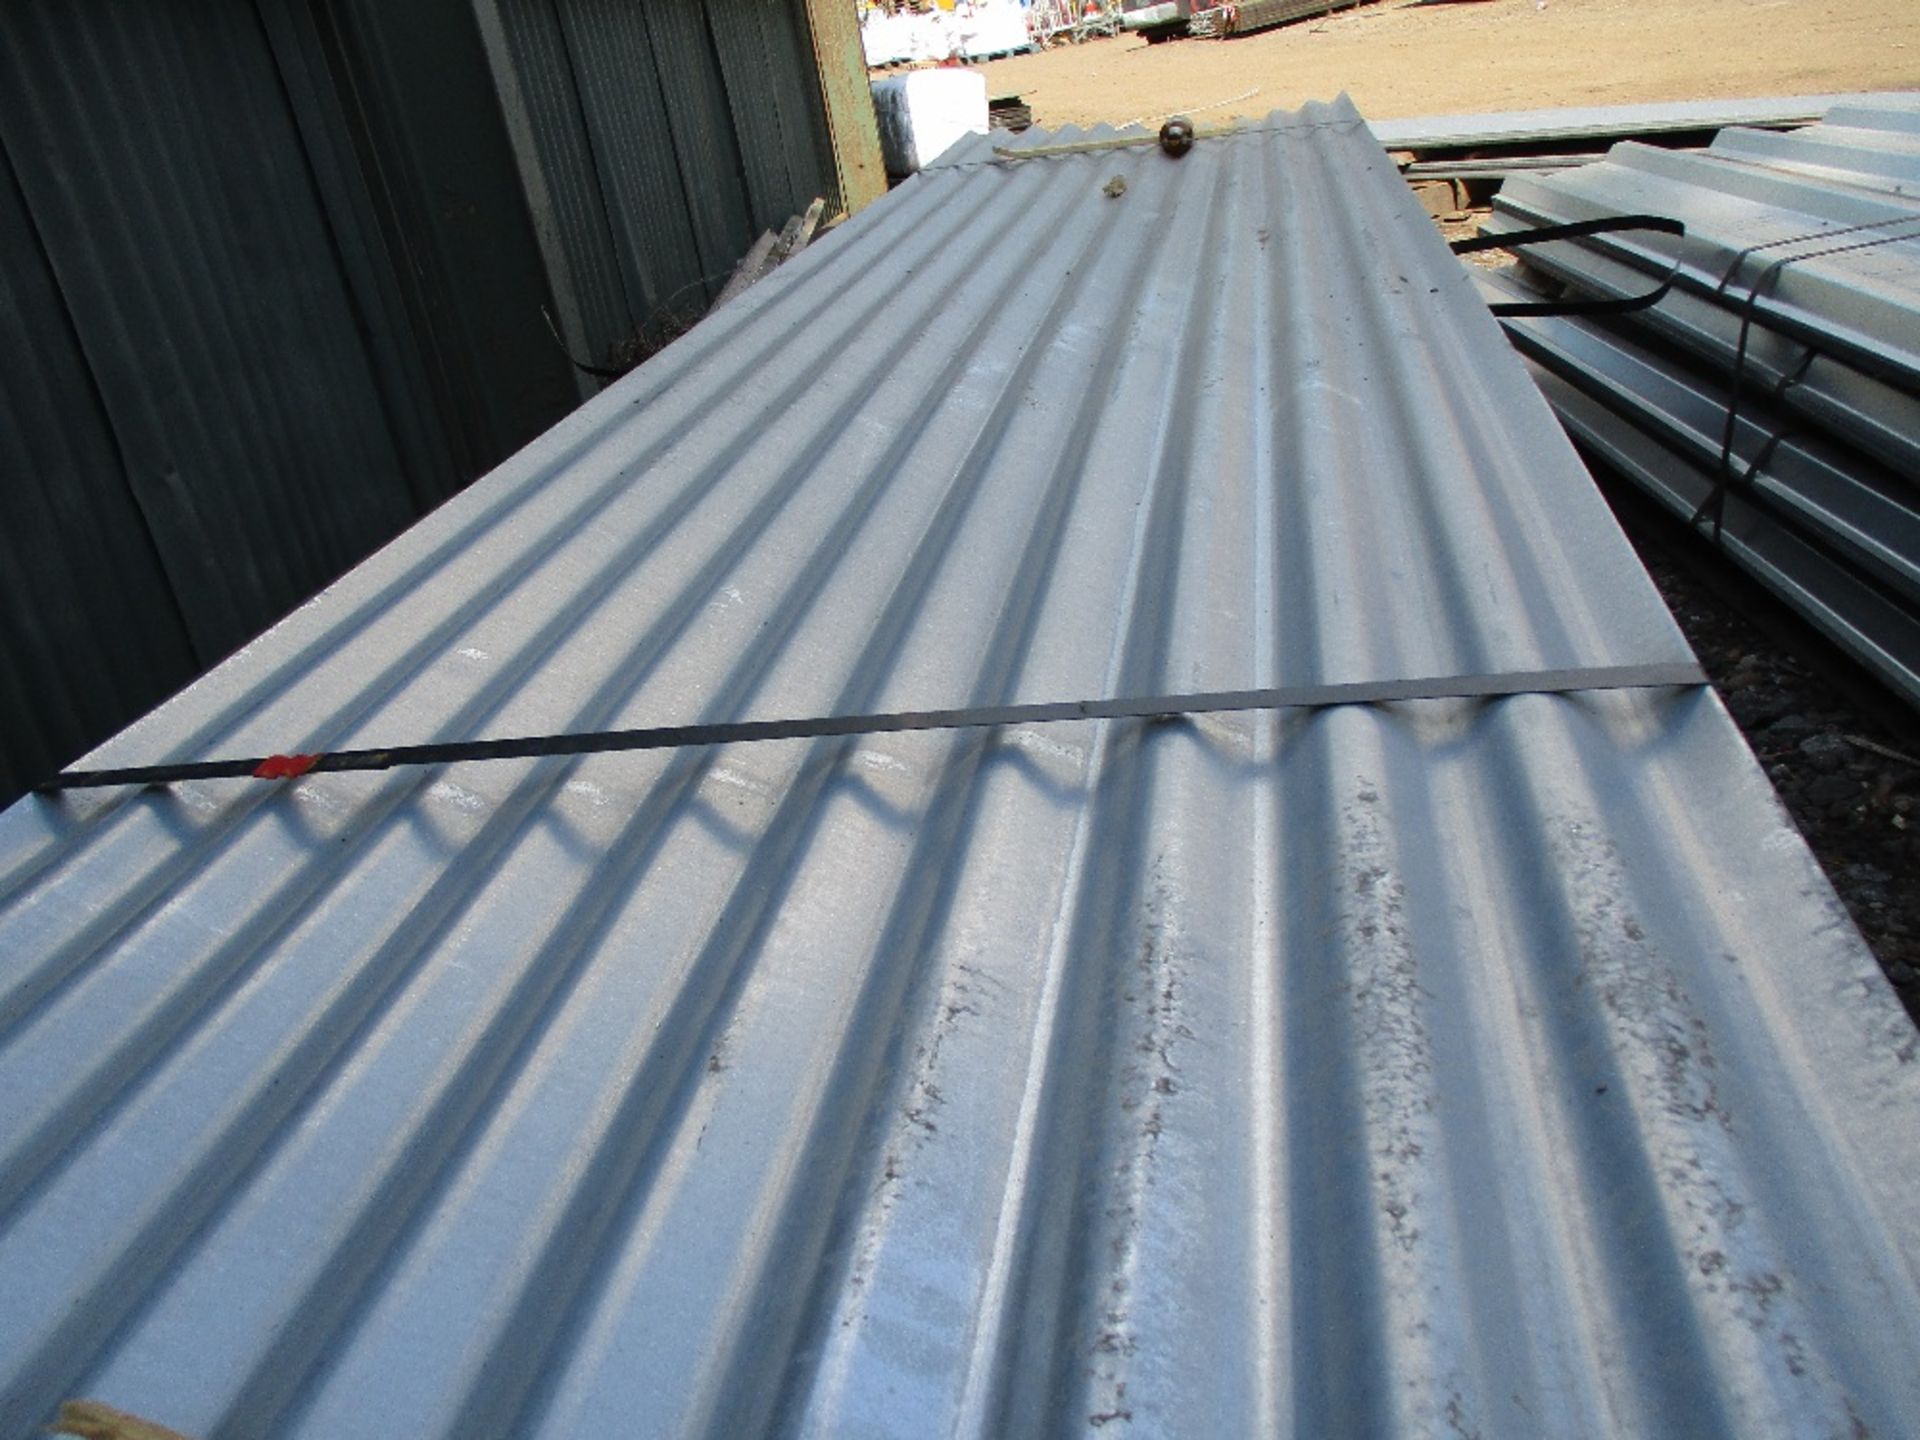 100NO 12FT CORRUGATED ROOF SHEETS, SOLD IN 4 PACKS OF 25NO - Image 4 of 4